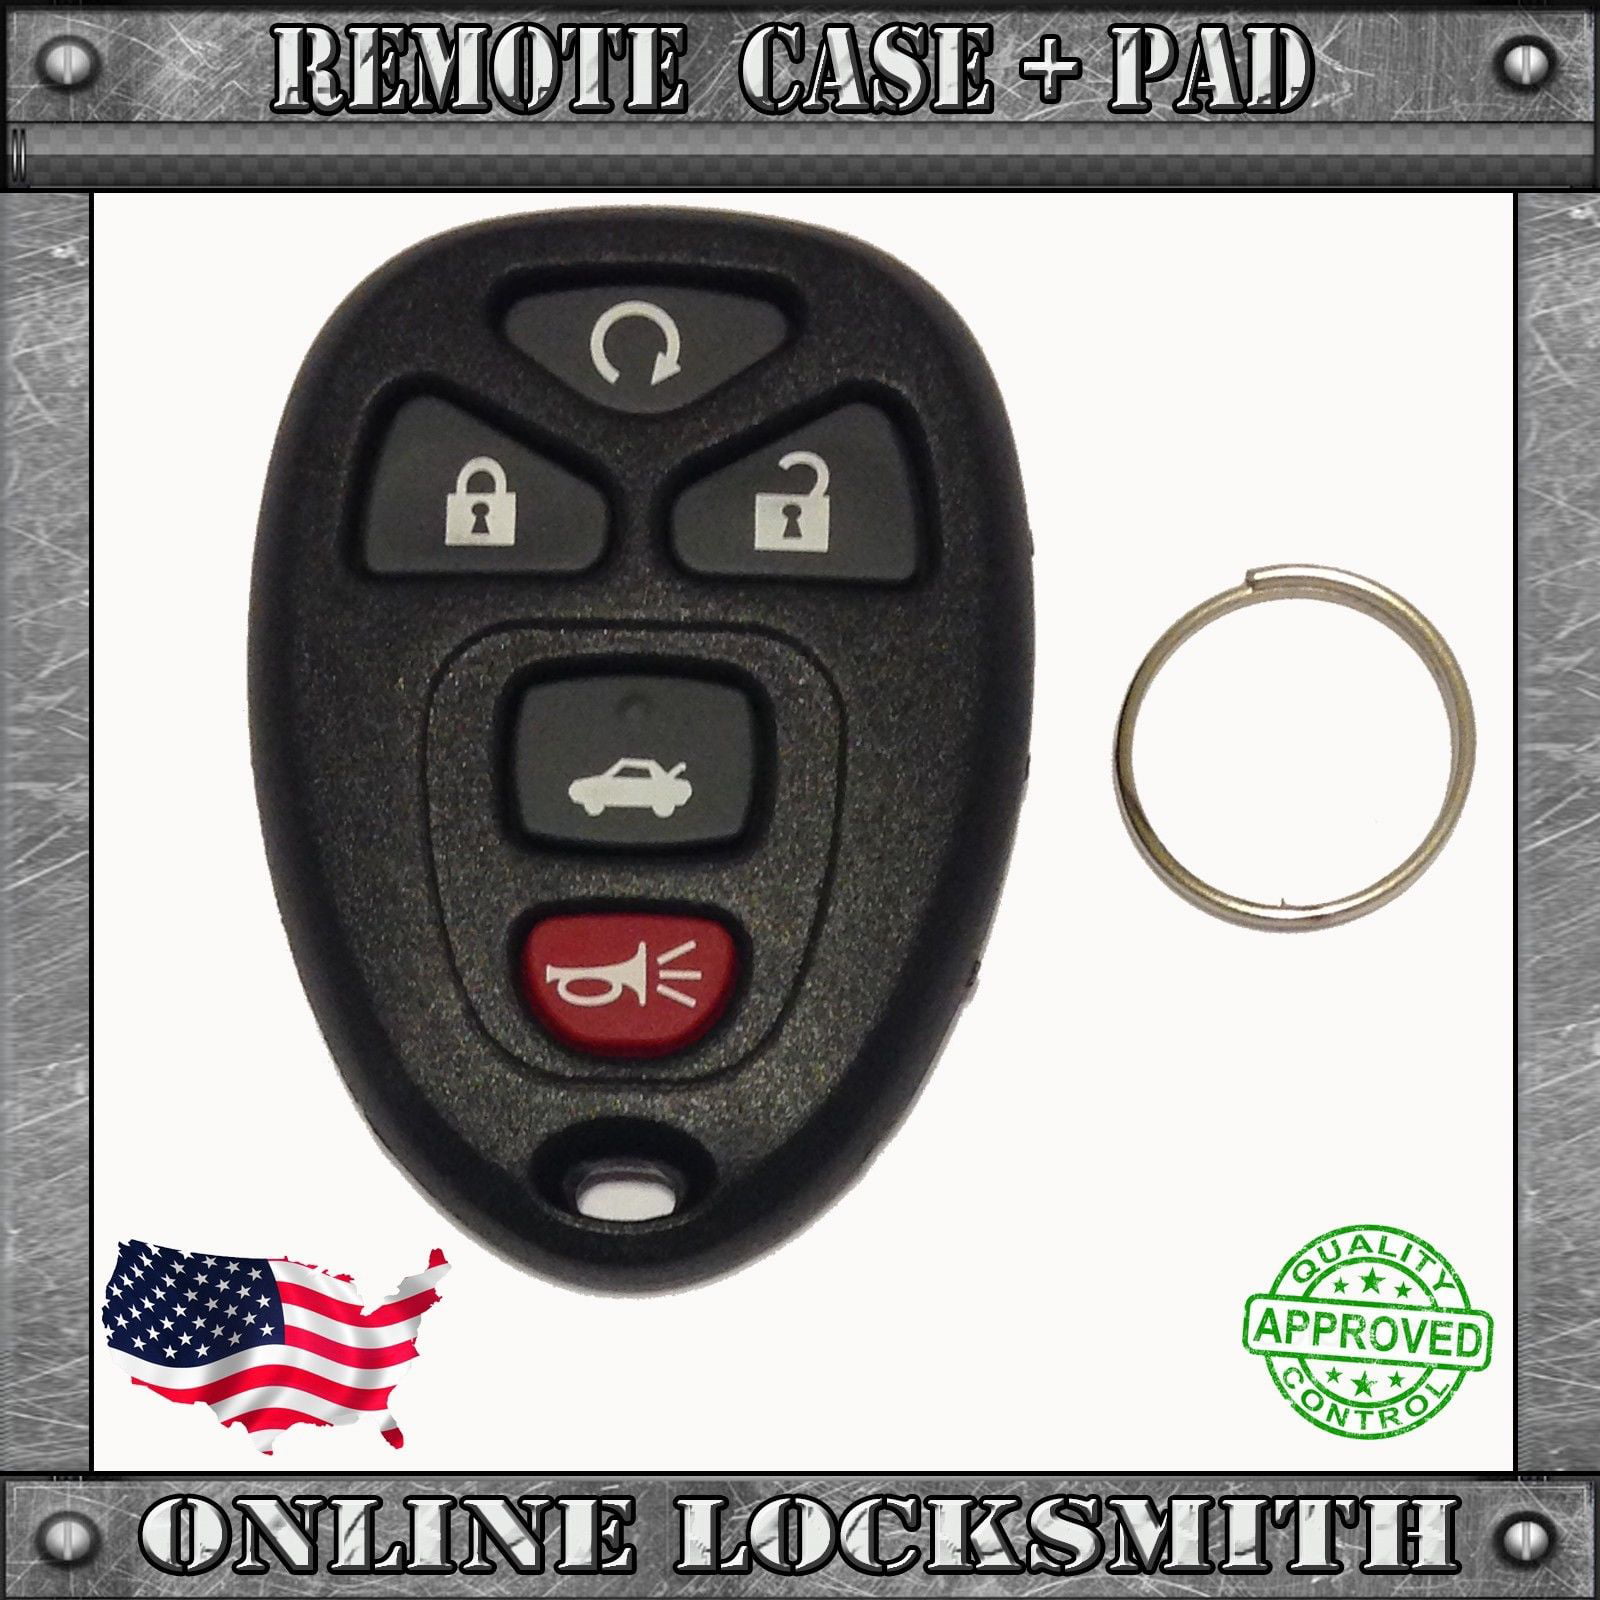 keyless entry remote for GM 22733524 new case button pad for key fob car control 